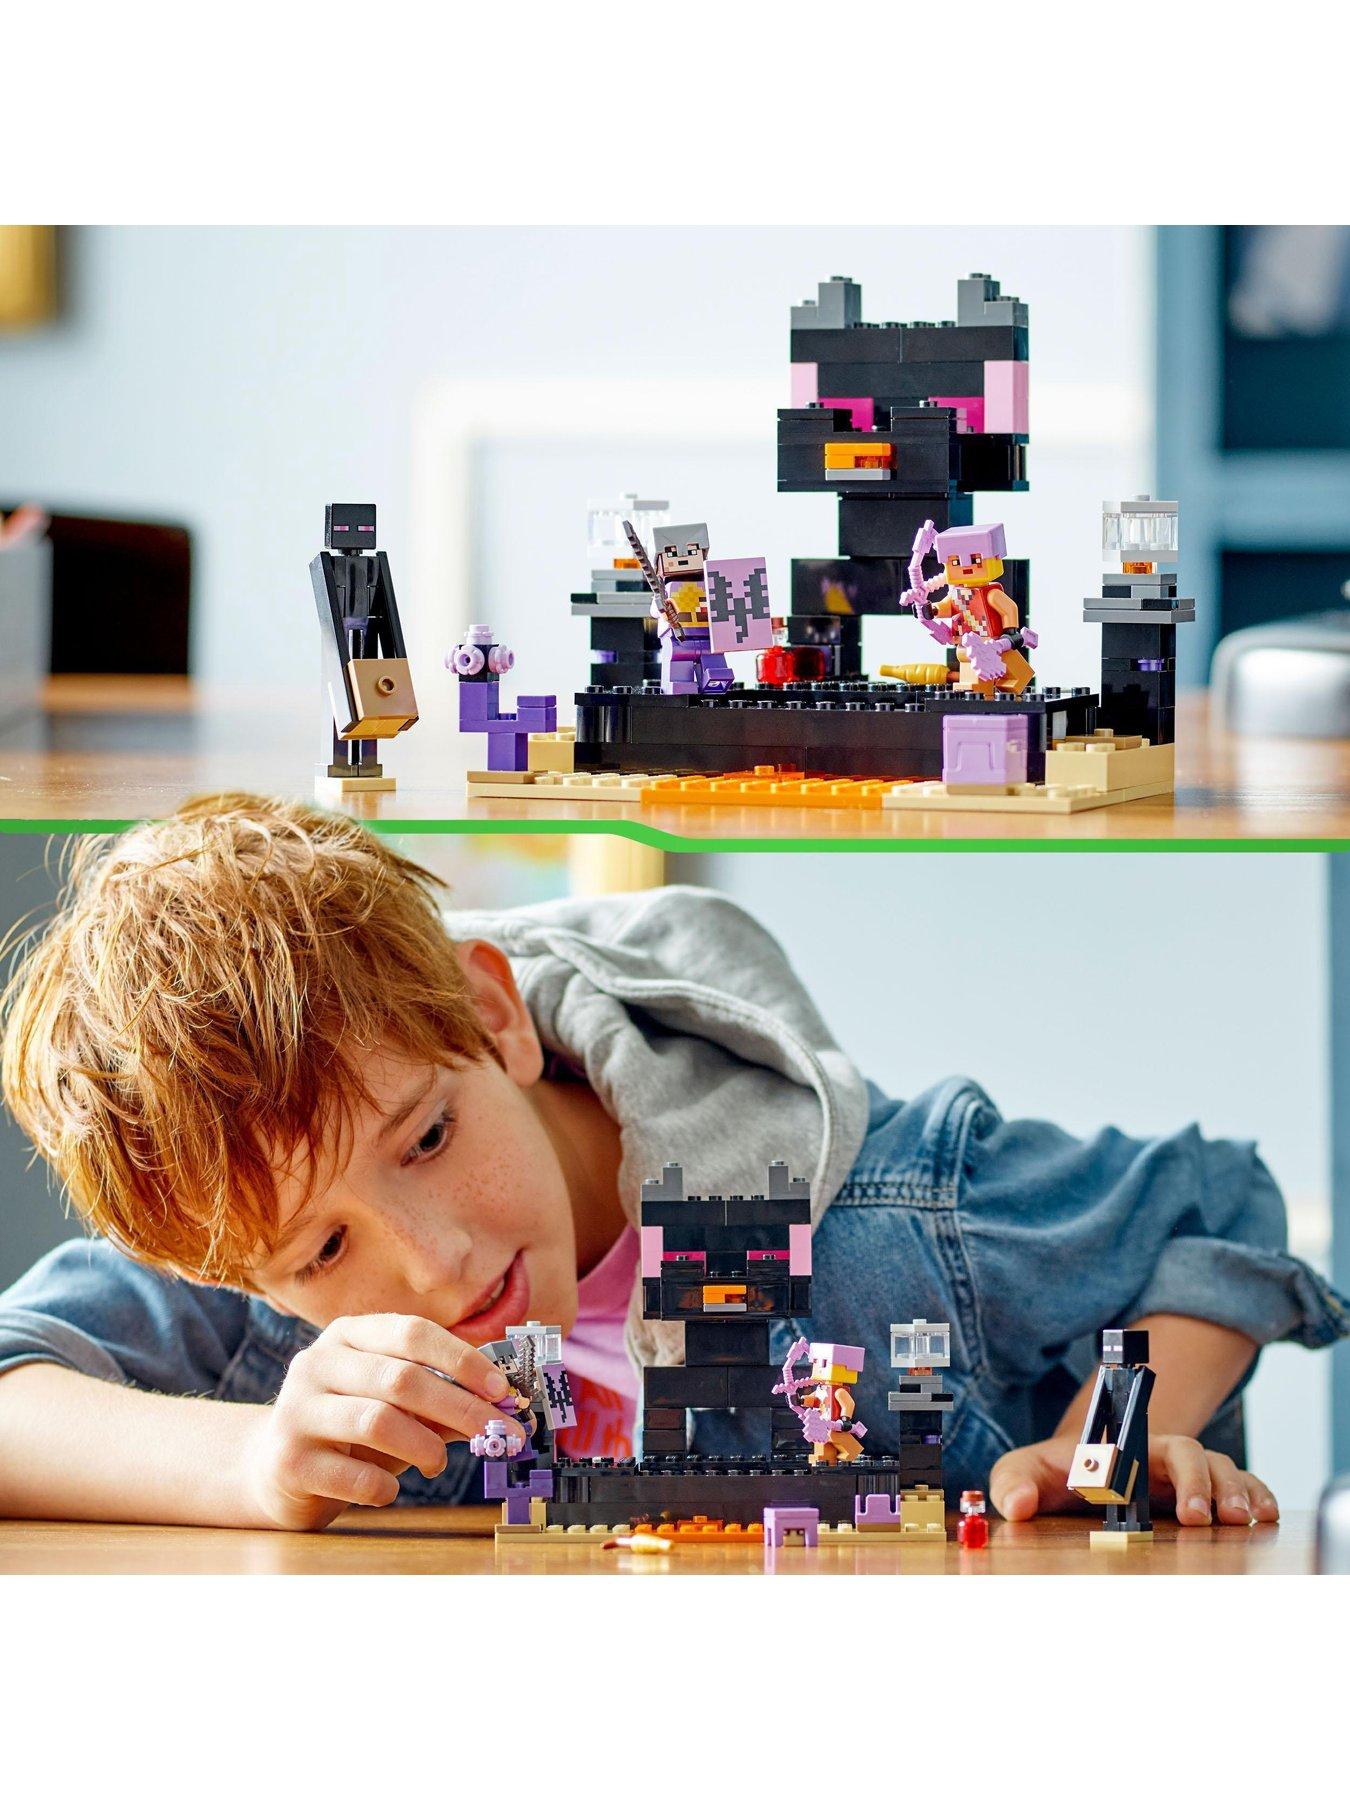 The End Arena 21242 - LEGO® Minecraft™ Sets -  for kids